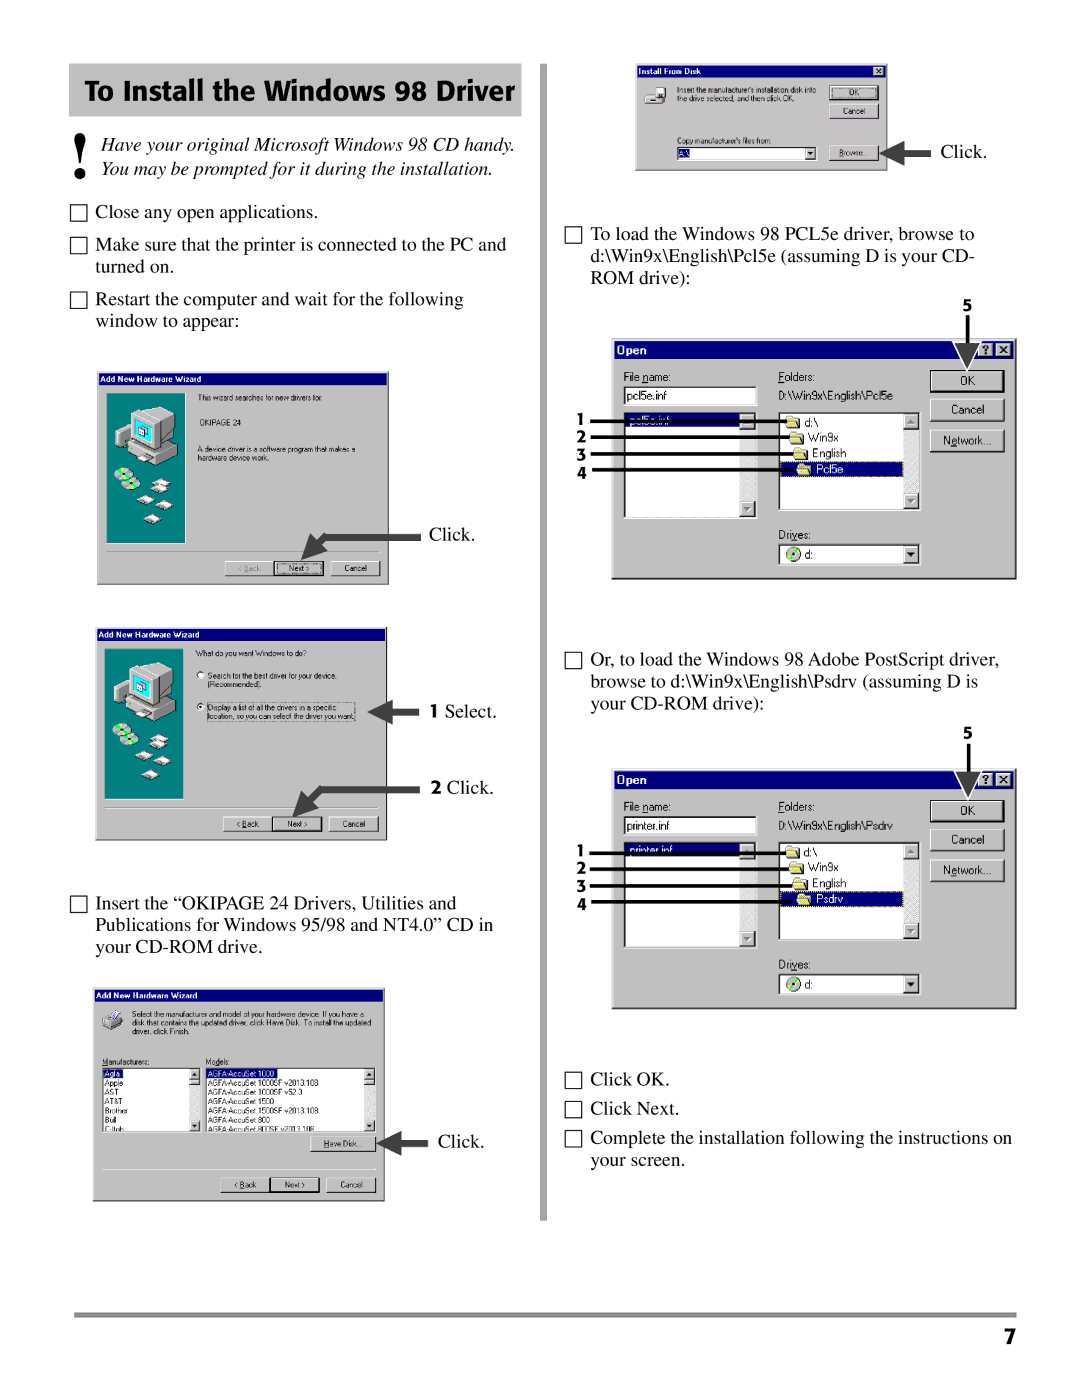 Oki PAGE 24 quick start To Install the Windows 98 Driver 